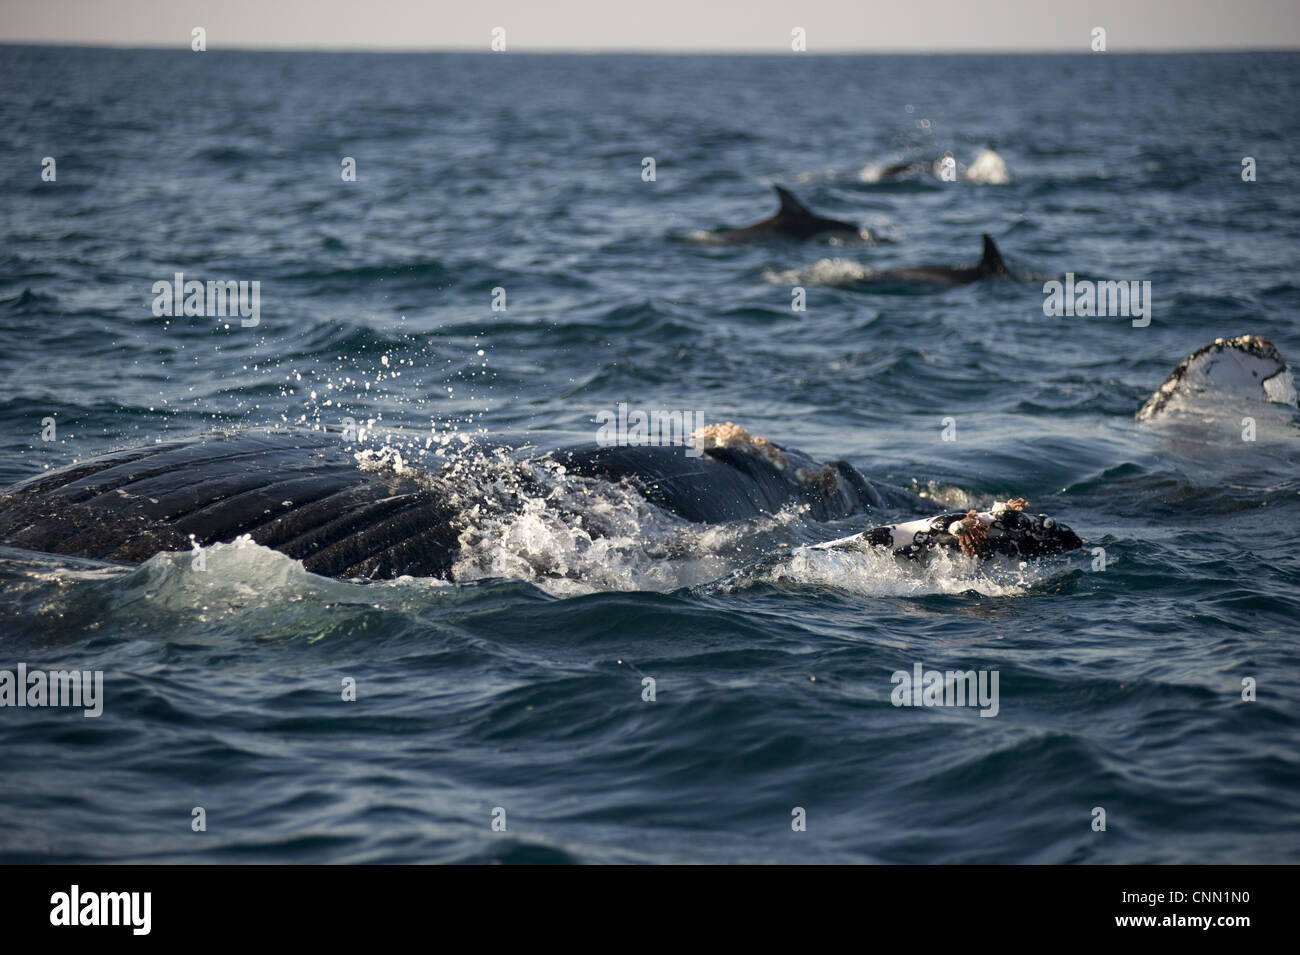 Humpback Whale Megaptera novaeangliae adult swimming surface sea Long-beaked Common Dolphins Delphinus capensis distance Stock Photo